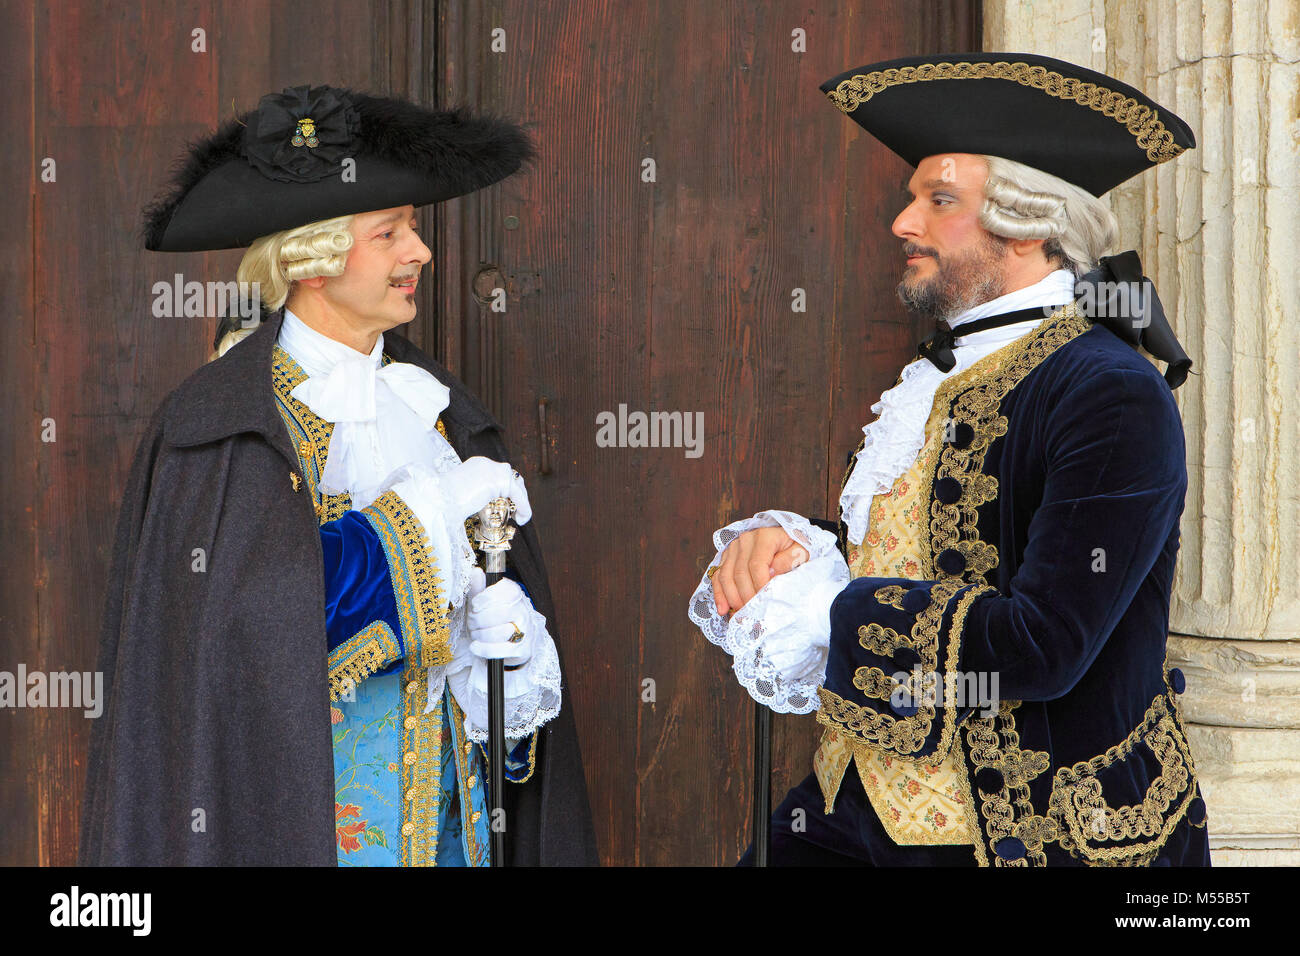 Two gentlemen in 18th-century attire outside the Doge's Palace during the Carnival of Venice (Carnevale di Venezia) in Venice, Italy Stock Photo